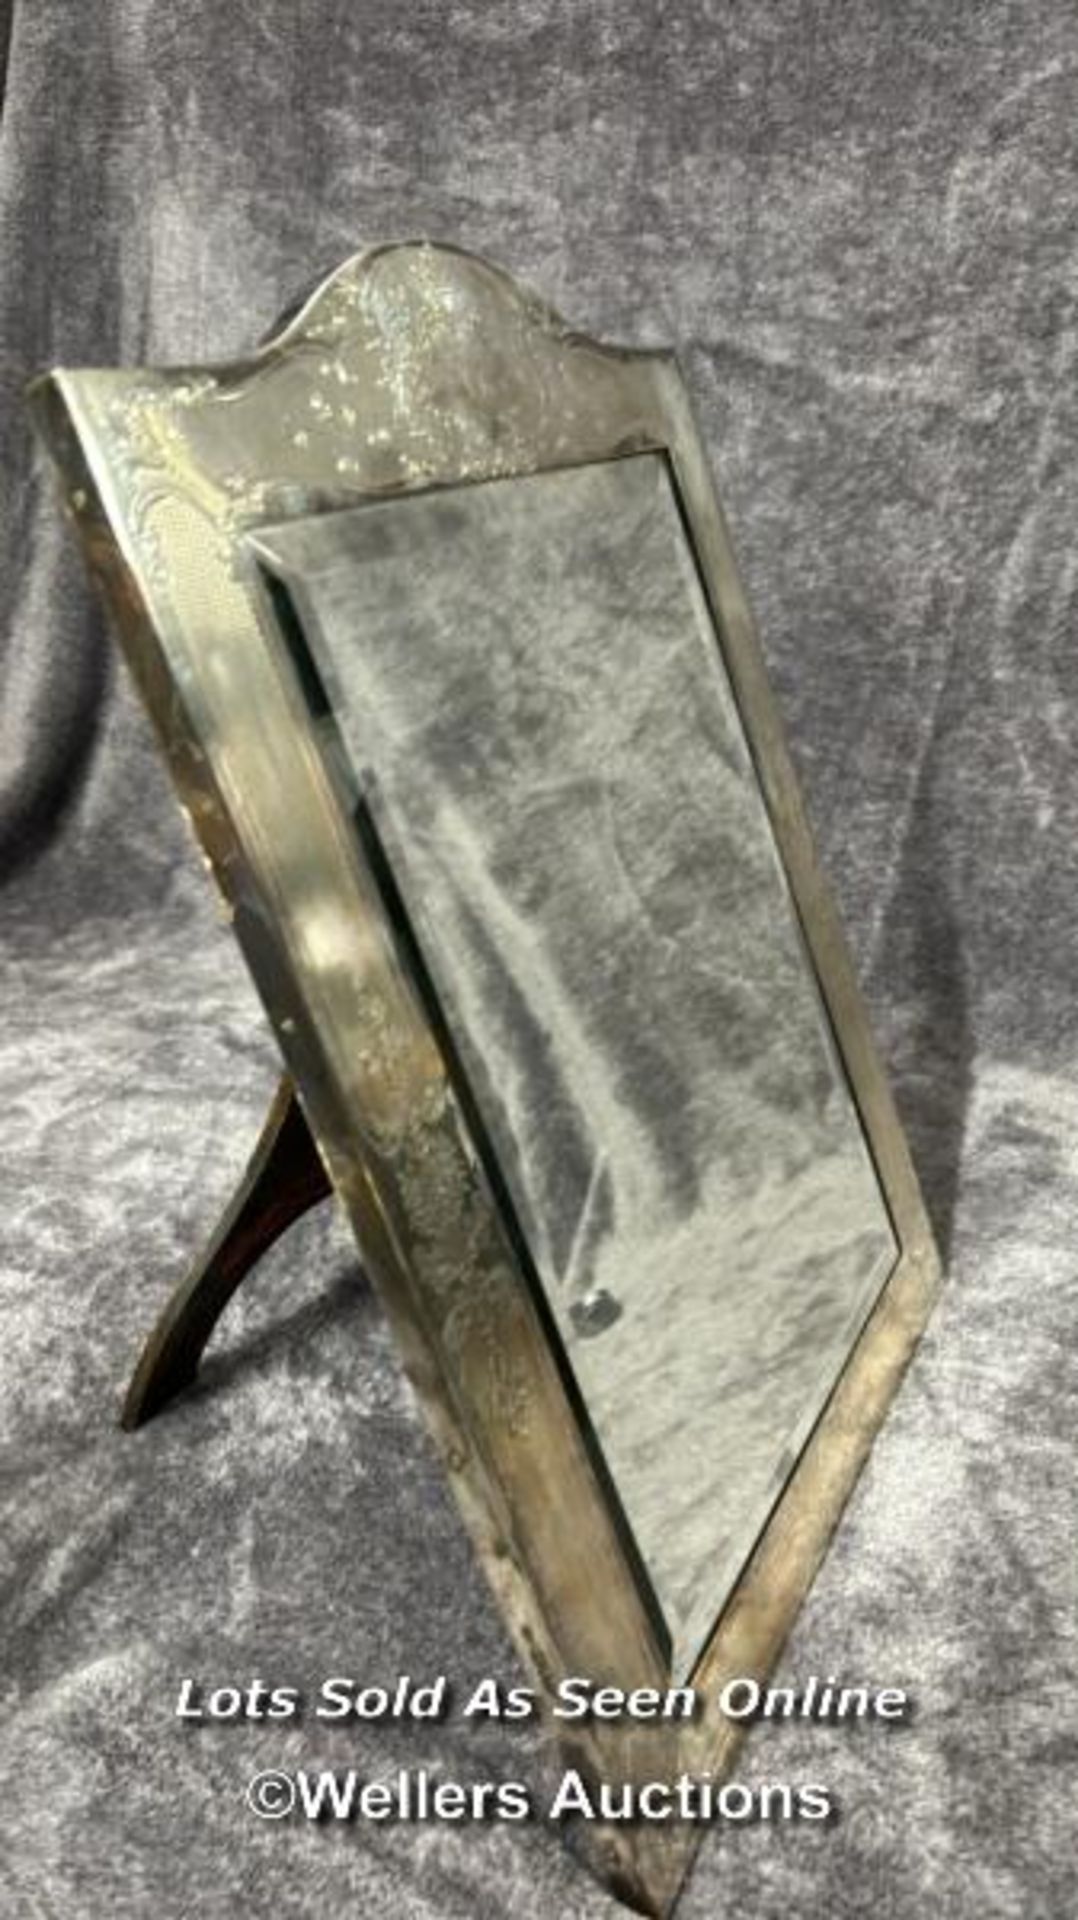 Antique bevilled mirror in sterling silver frame, hallmarked Goldmsiths & Silversmiths Company - Image 2 of 8